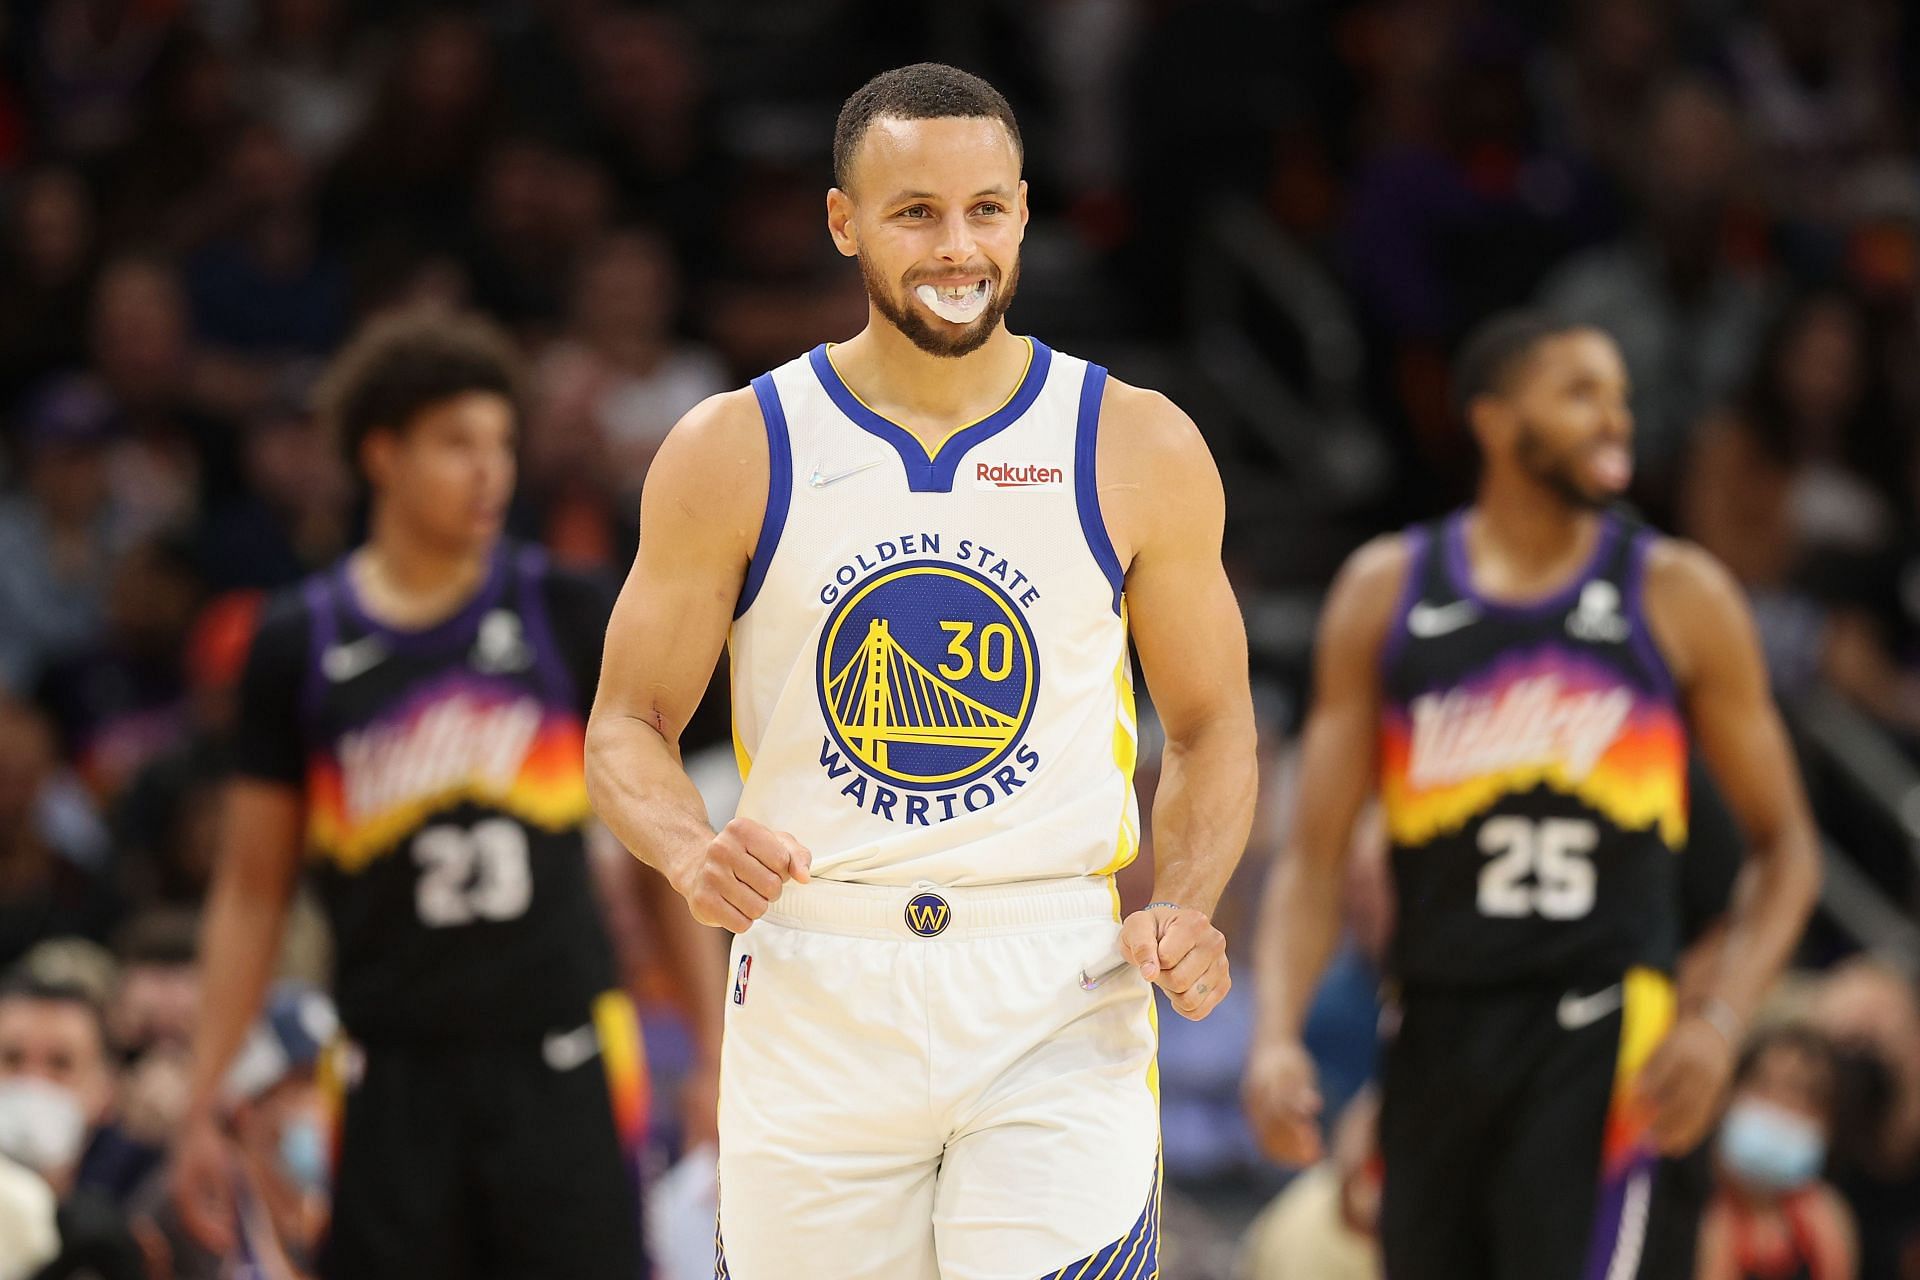 Steph Curry #30 of the Golden State Warriors reacts during the second half of the NBA game at Footprint Center on November 30, 2021 in Phoenix, Arizona.